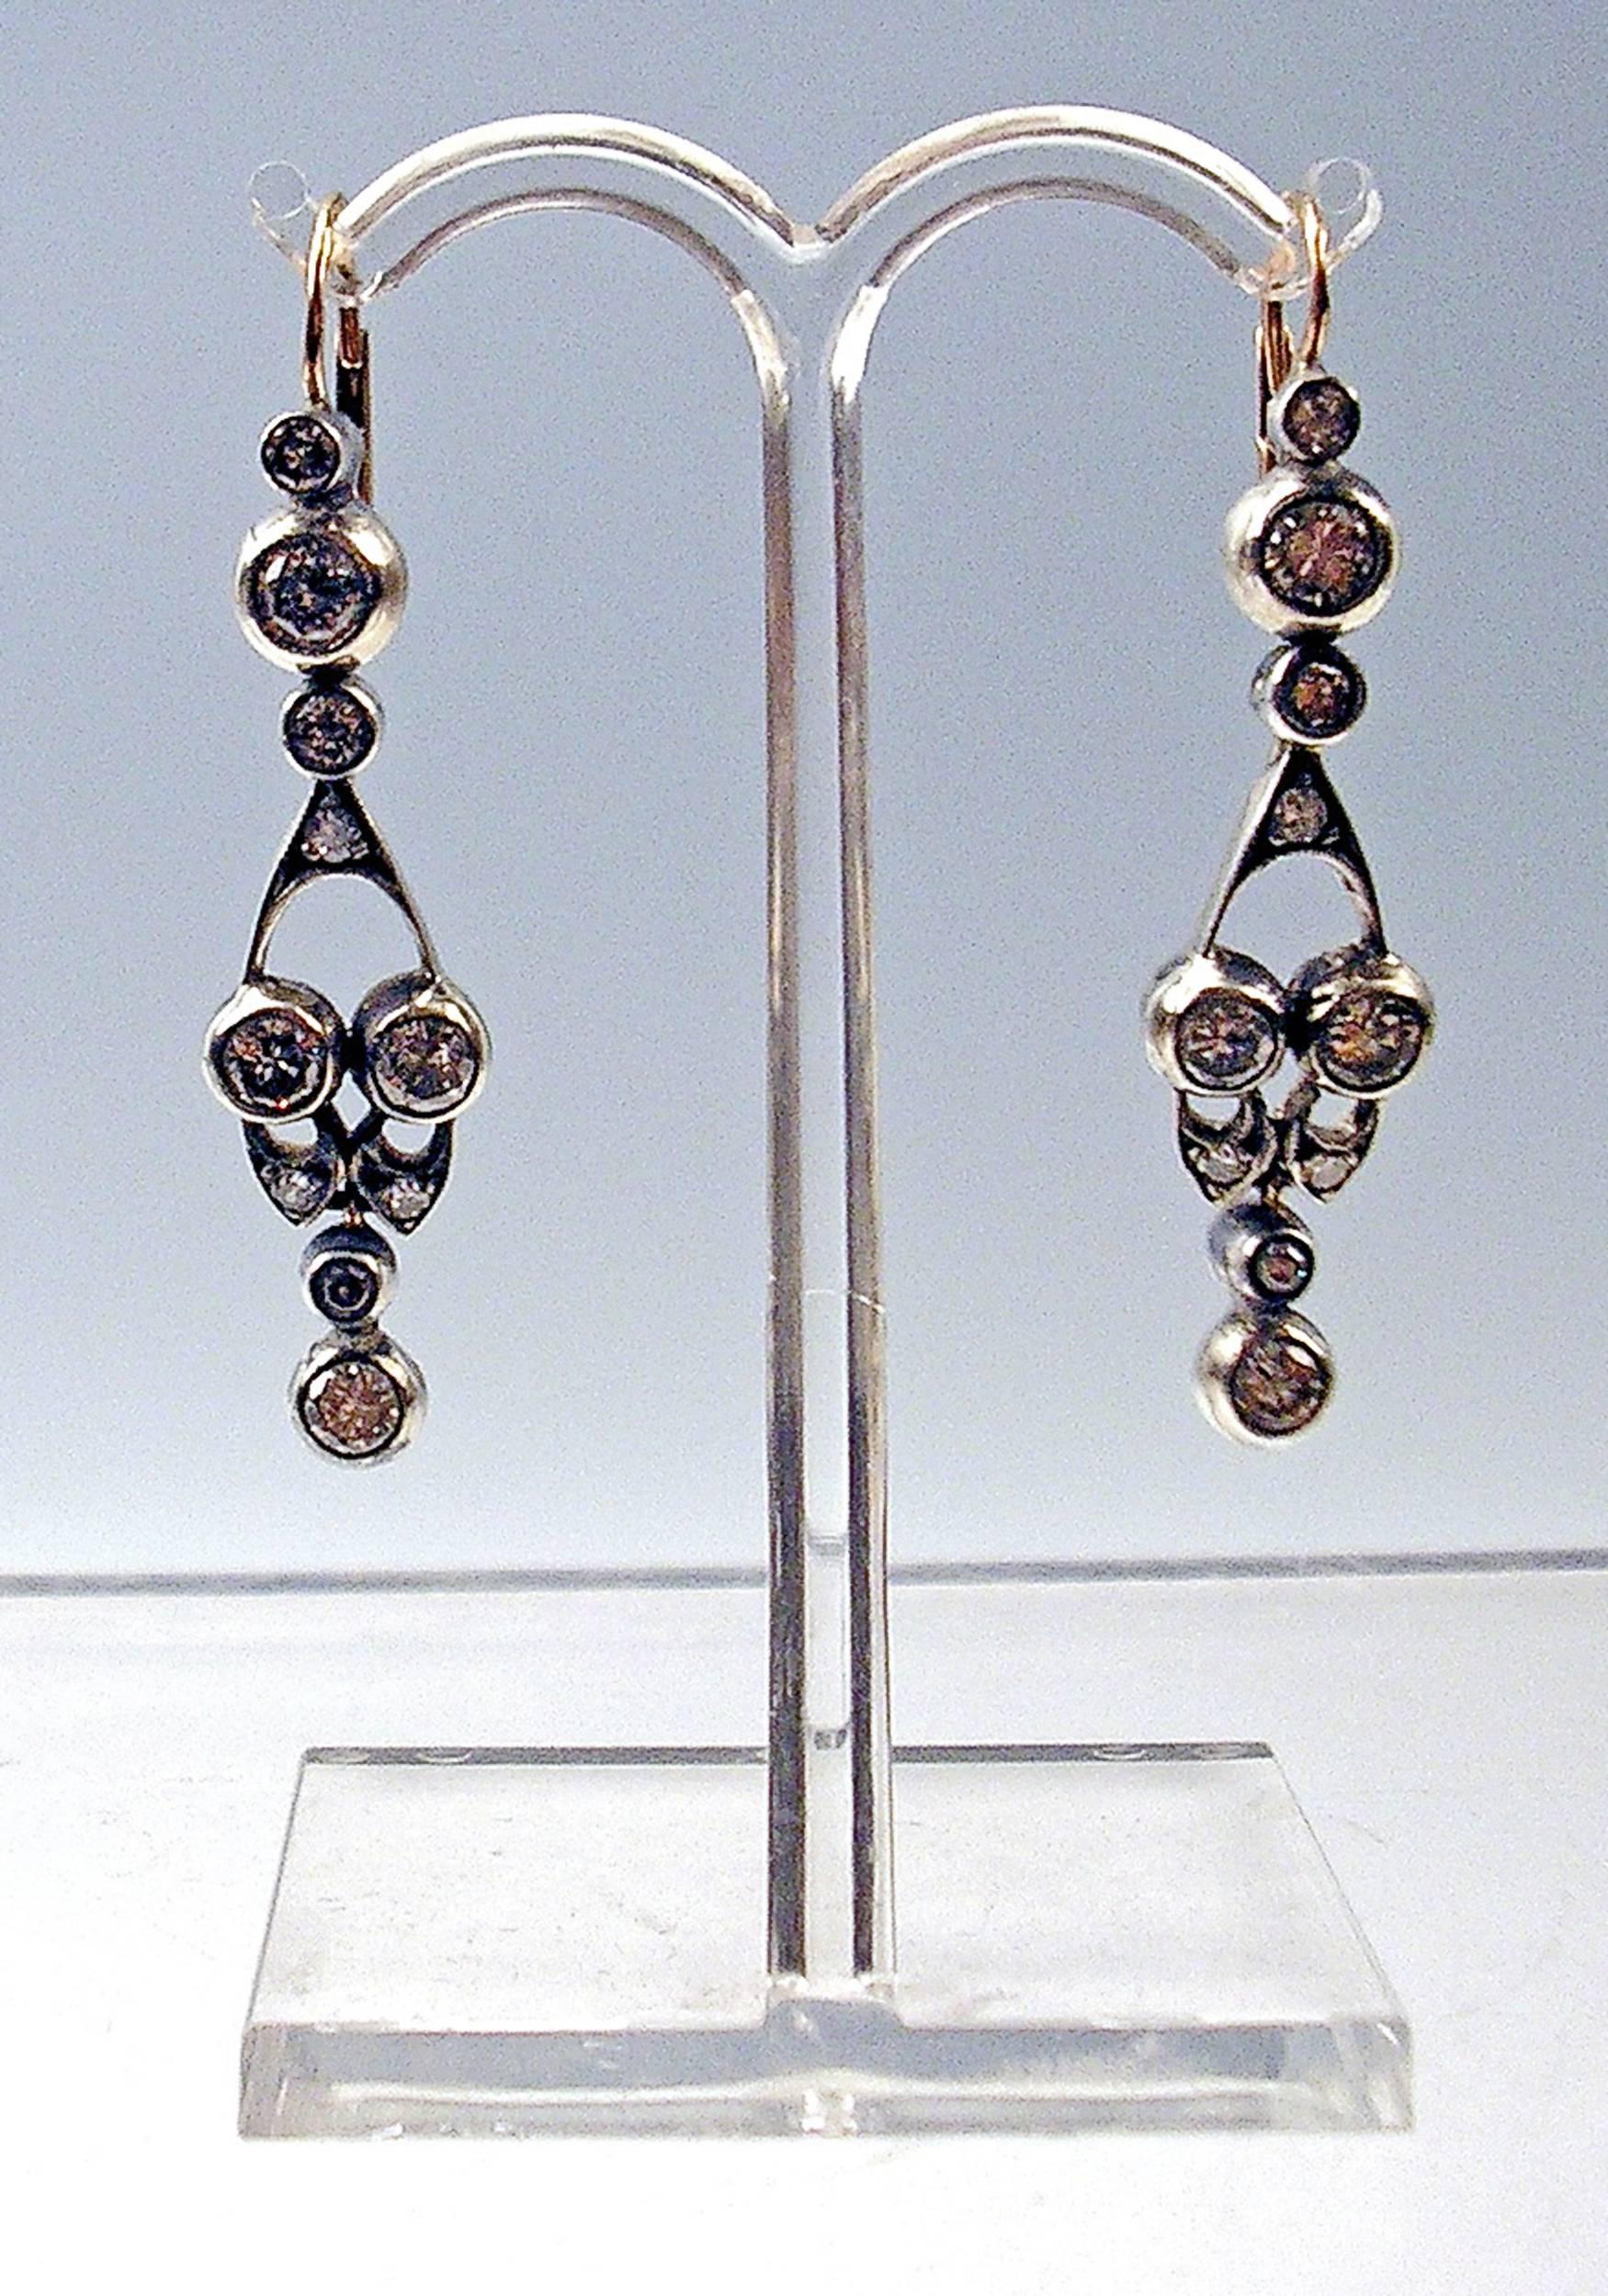 Stunning Art Nouveau Golden Earrings with Diamonds  (vintage cut). 

GOLD  (14 CARAT GOLD / 585) +  DIAMONDS  (1.30 ct)

The Parts of Earrings are movable.

Total length:  4.5 cm     1.77  inches

Hallmarked:
Austrian Official Punch   
(